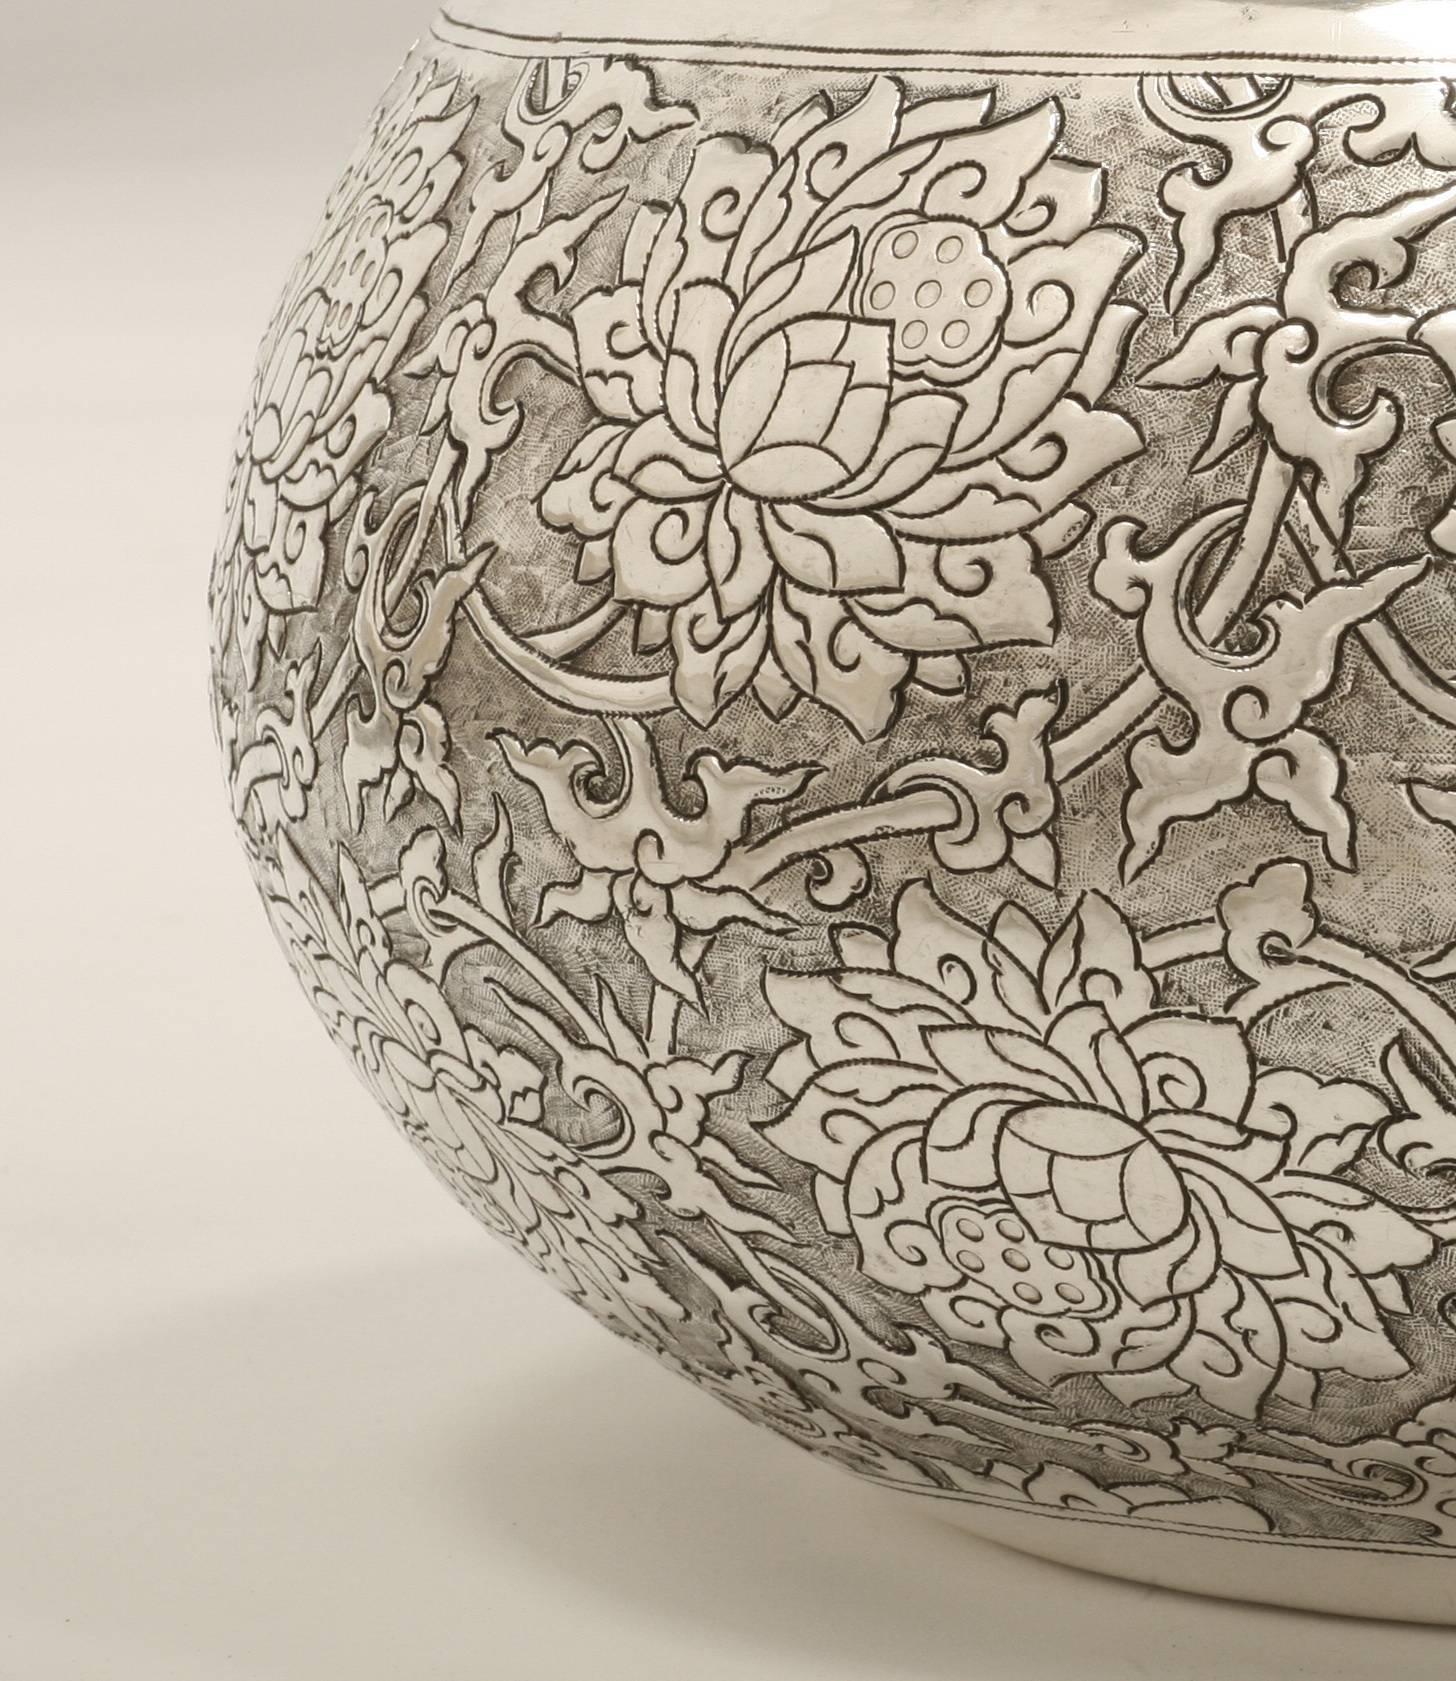 The large contemporary solid silver bowl is finely chased with scrolling lotus motif (elegance and purity symbol), and available in other sizes.
The silver is 90% pure.